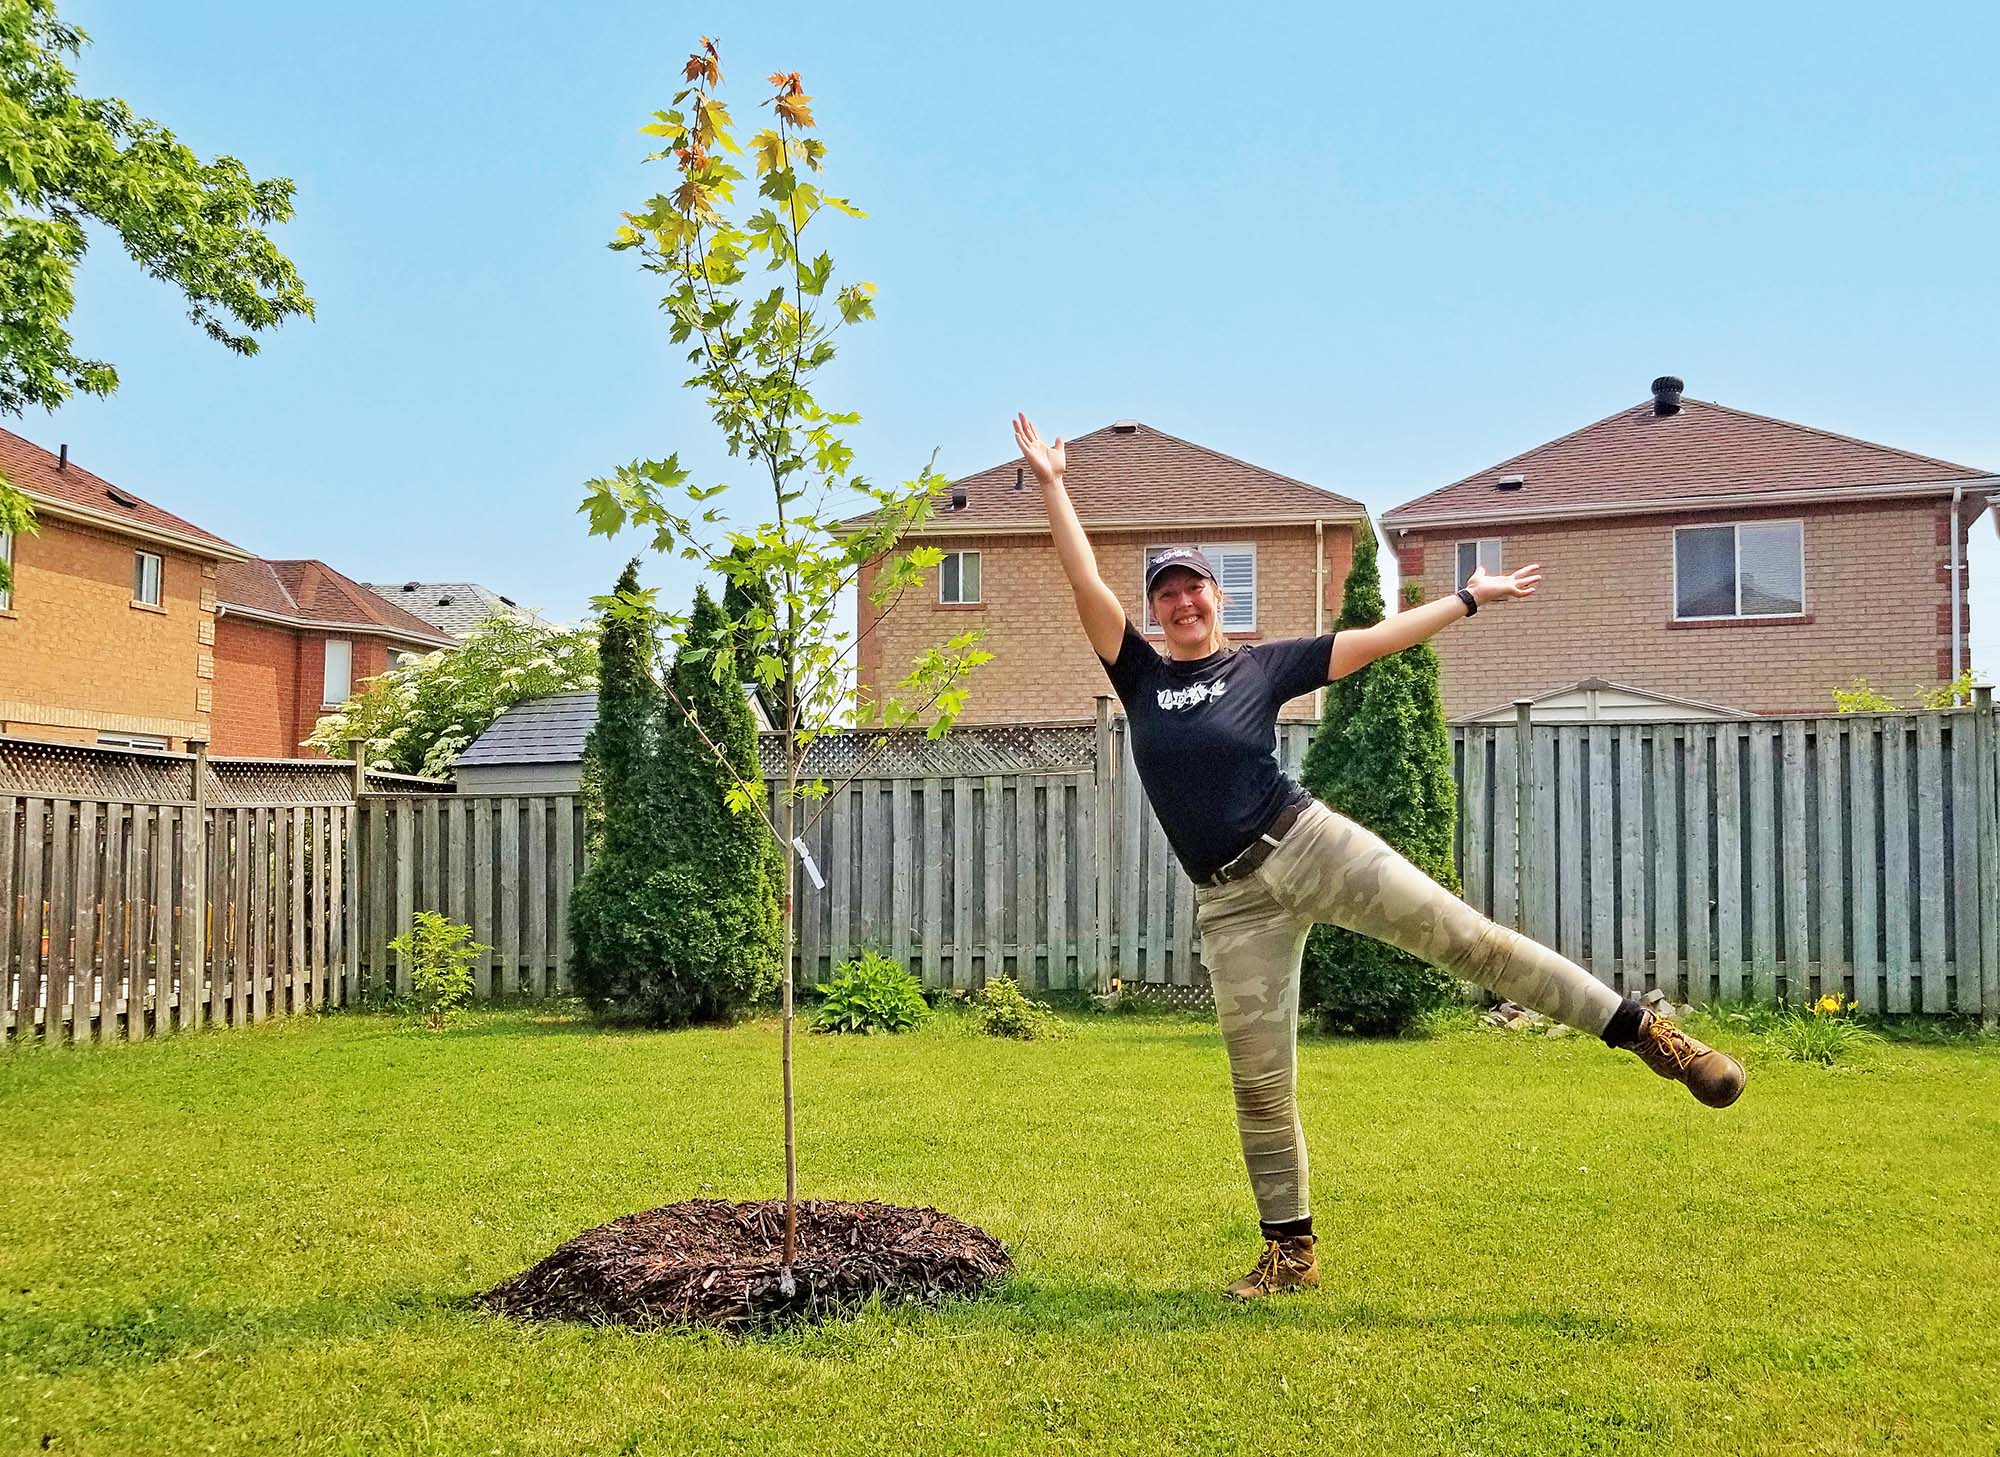 A person poses on one leg next to a newly planted maple tree in a suburban backyard